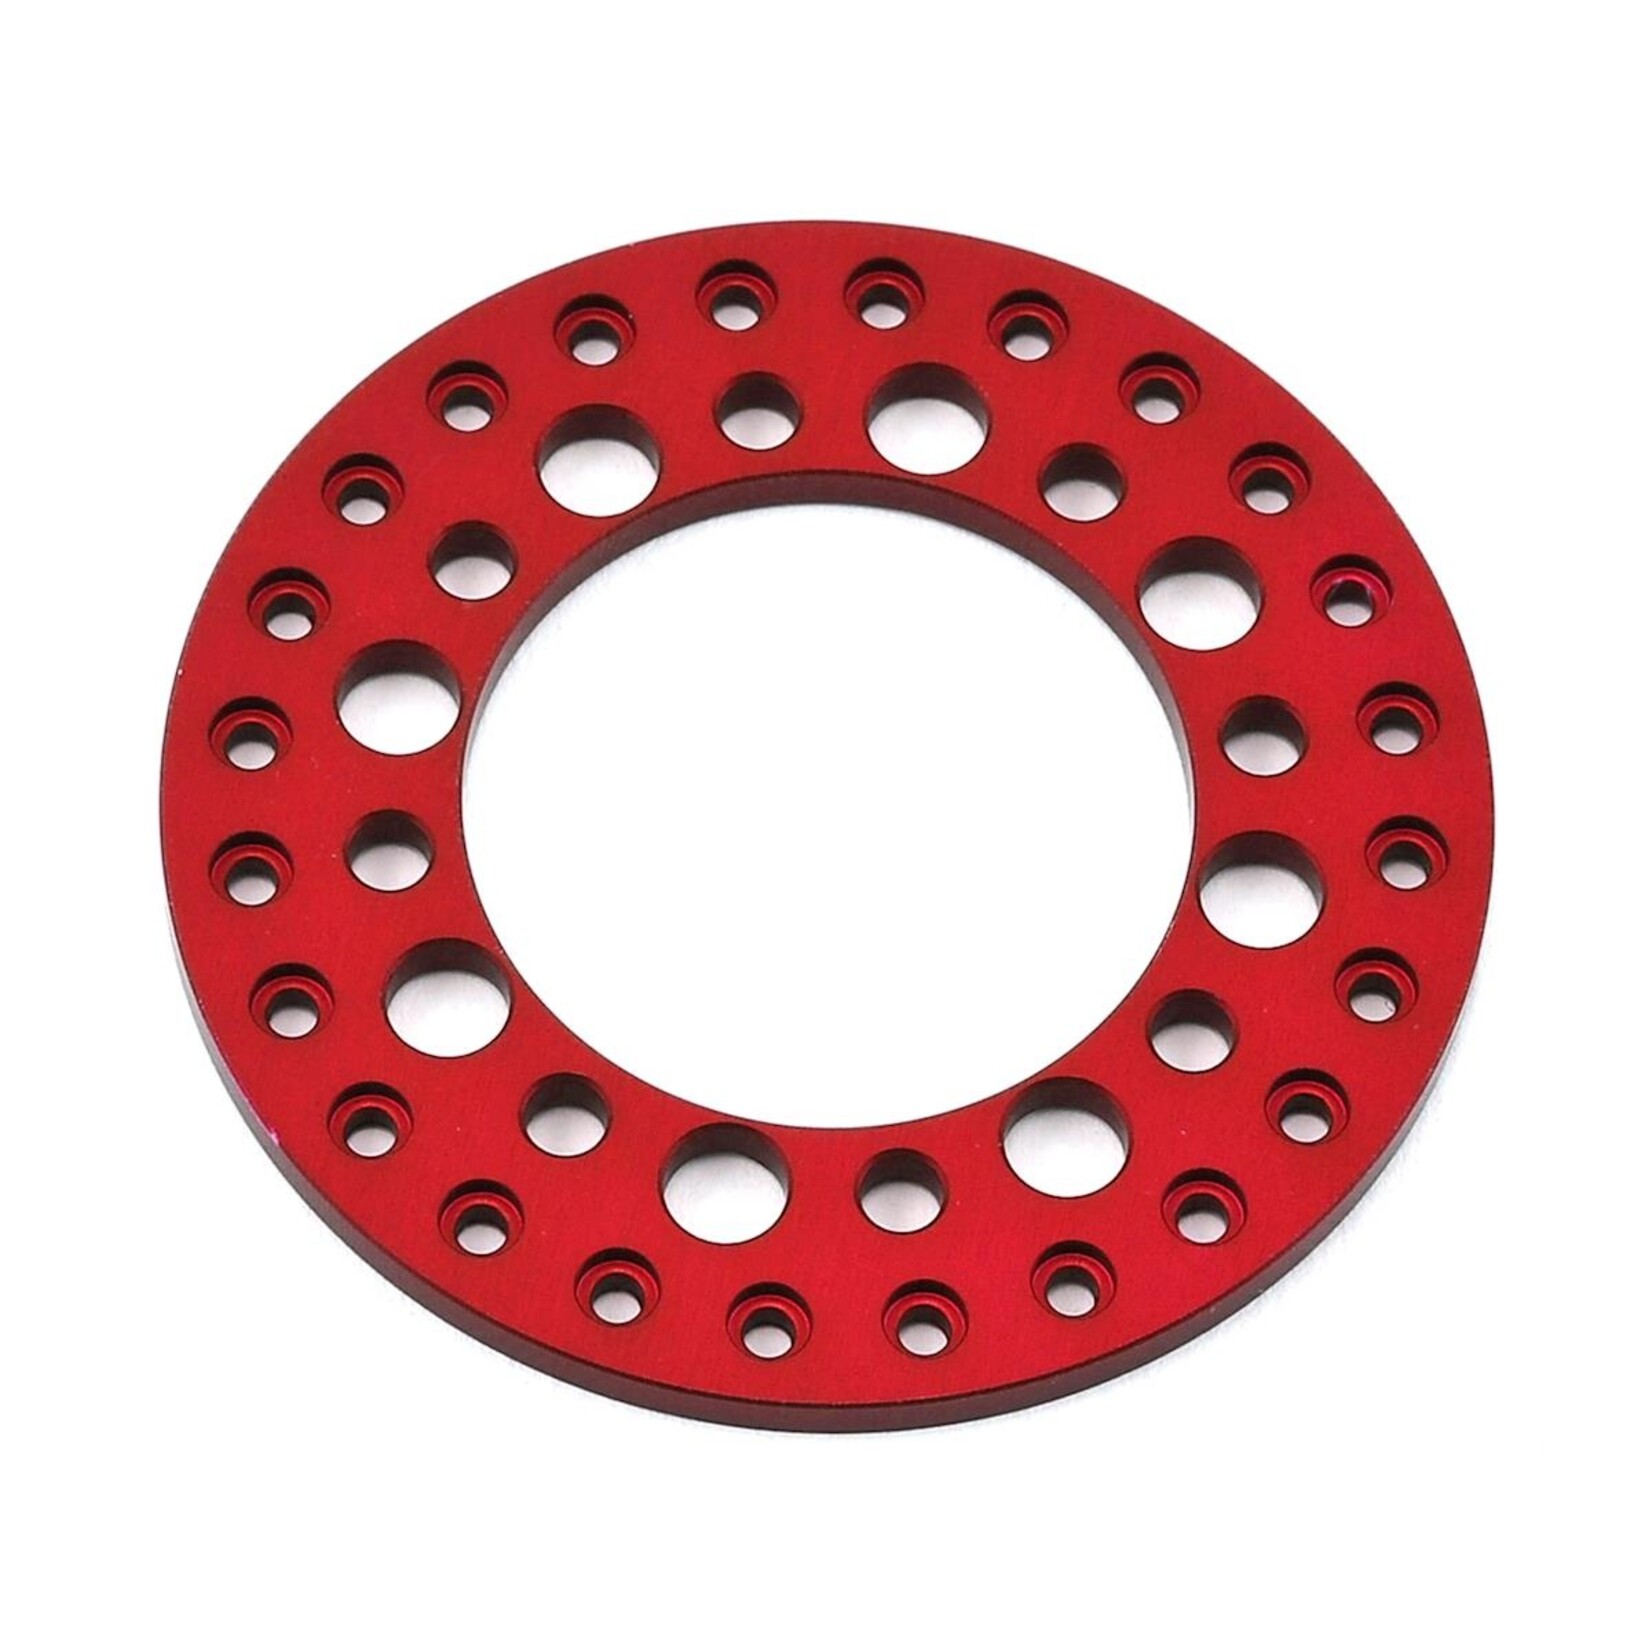 Vanquish Products Vanquish Products Holy 1.9" Rock Crawler Beadlock Ring (Red) #VPS05155